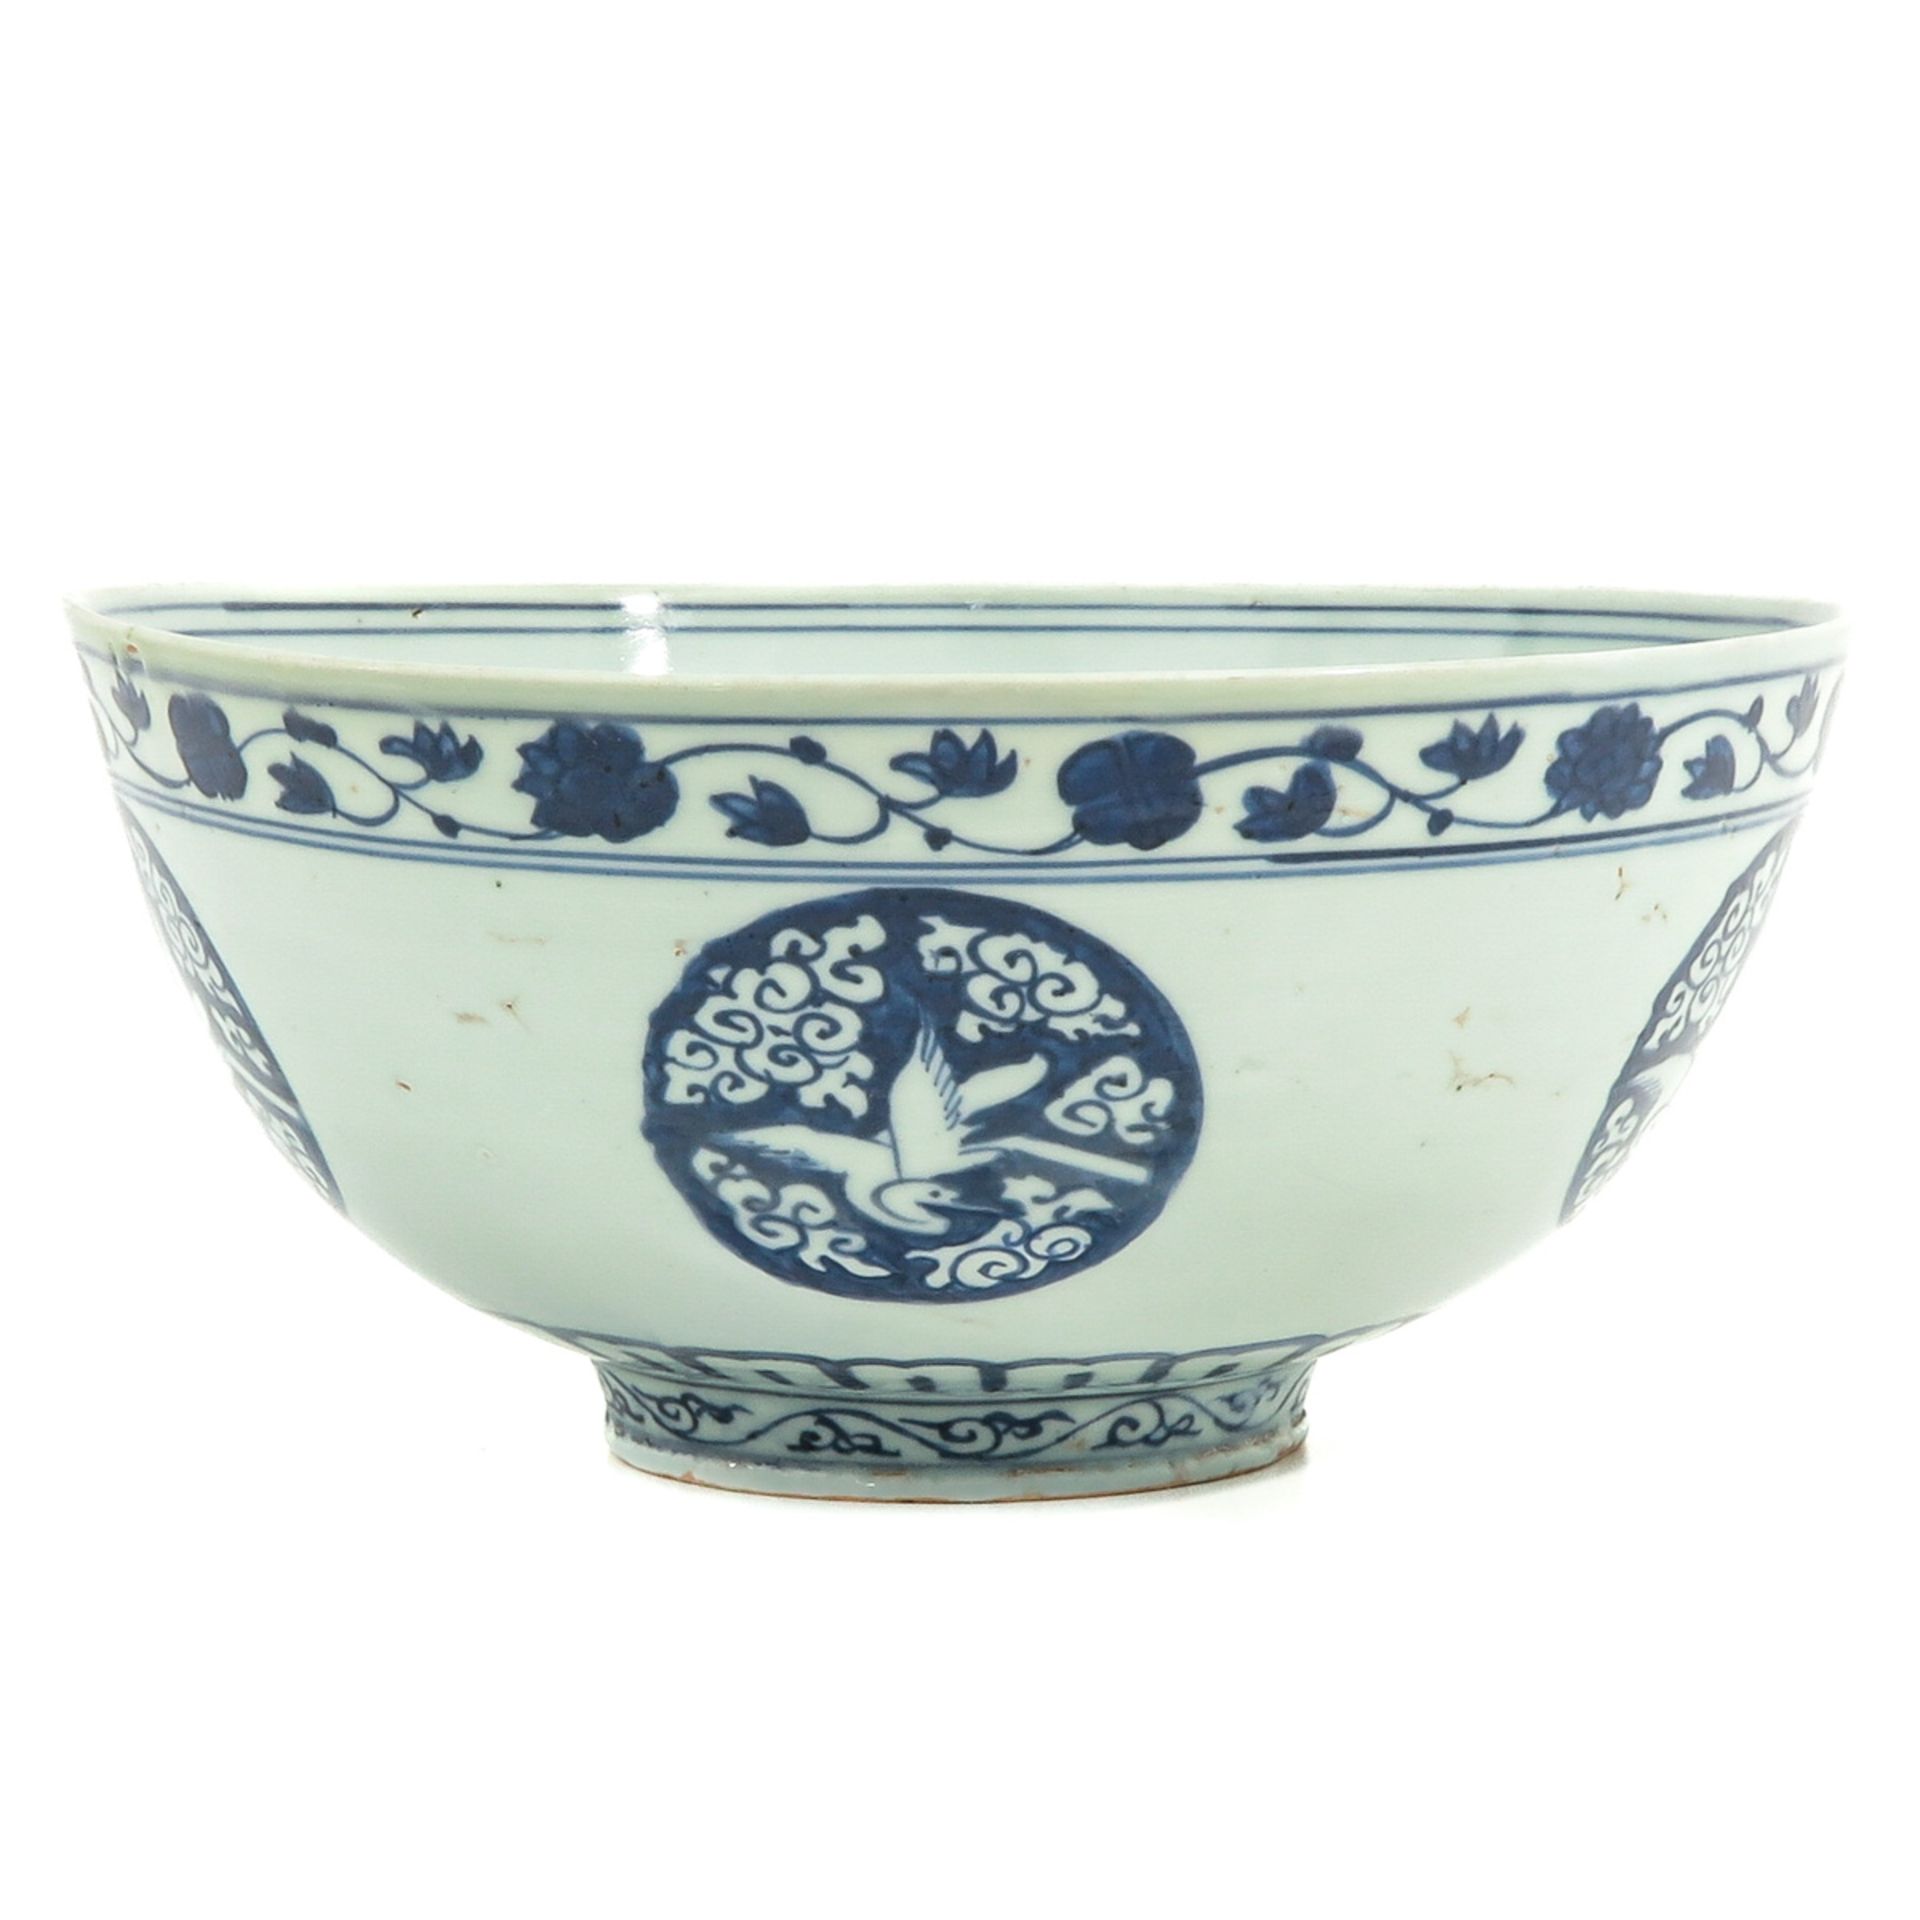 A Blue and White Serving Bowl